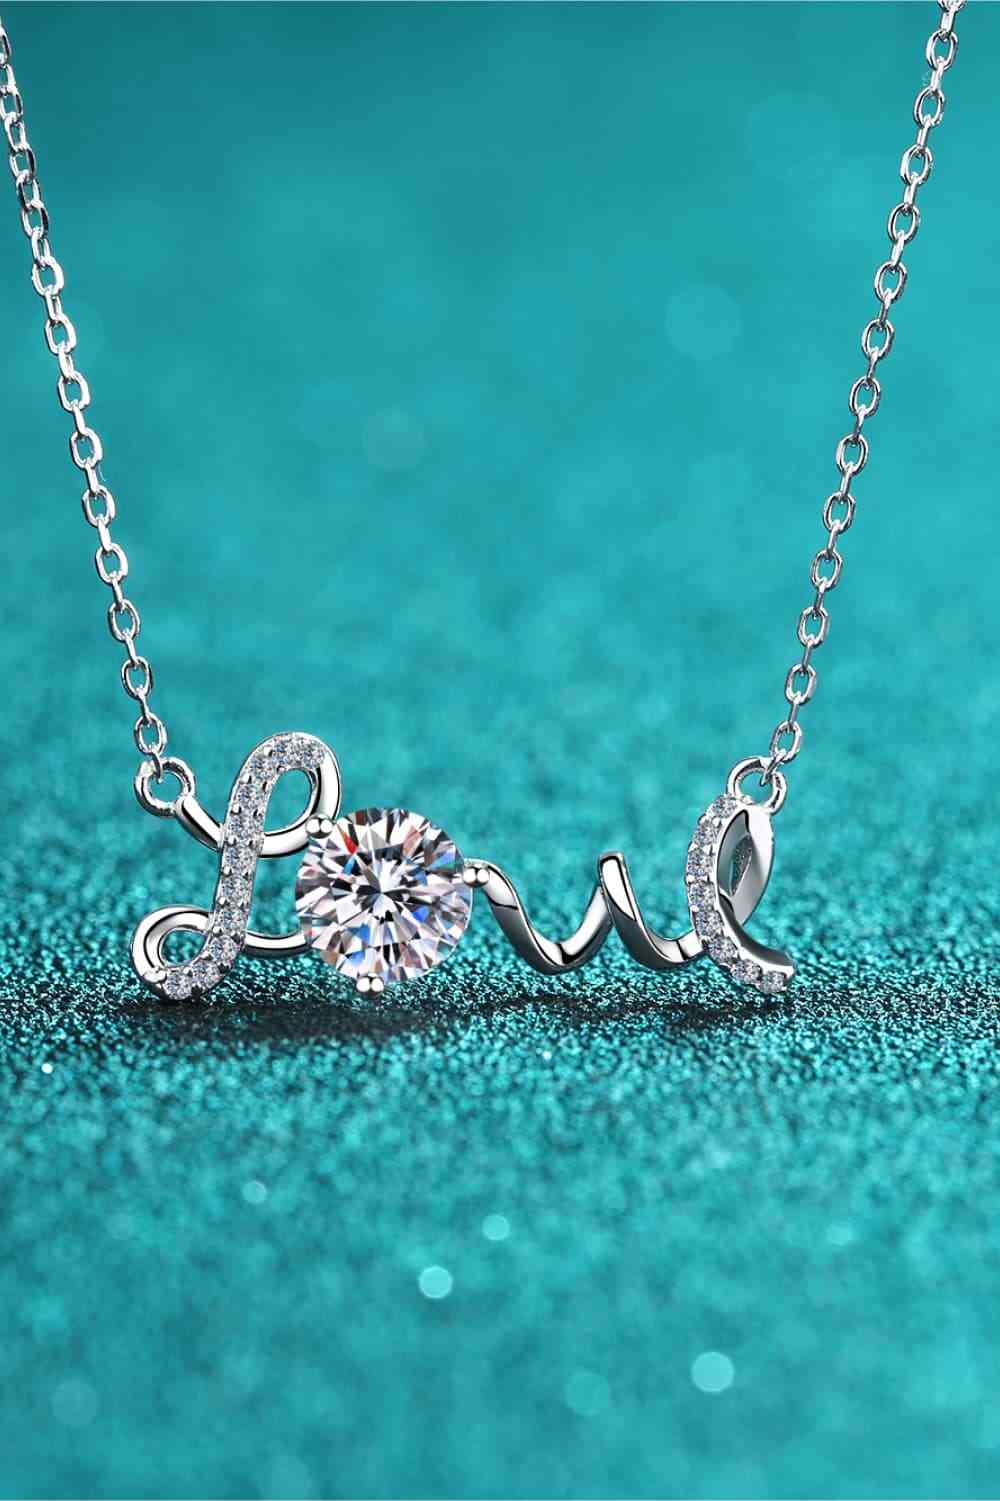 “Love” Necklace with 1 Carat Moissanite Gem, 925 Sterling Silver